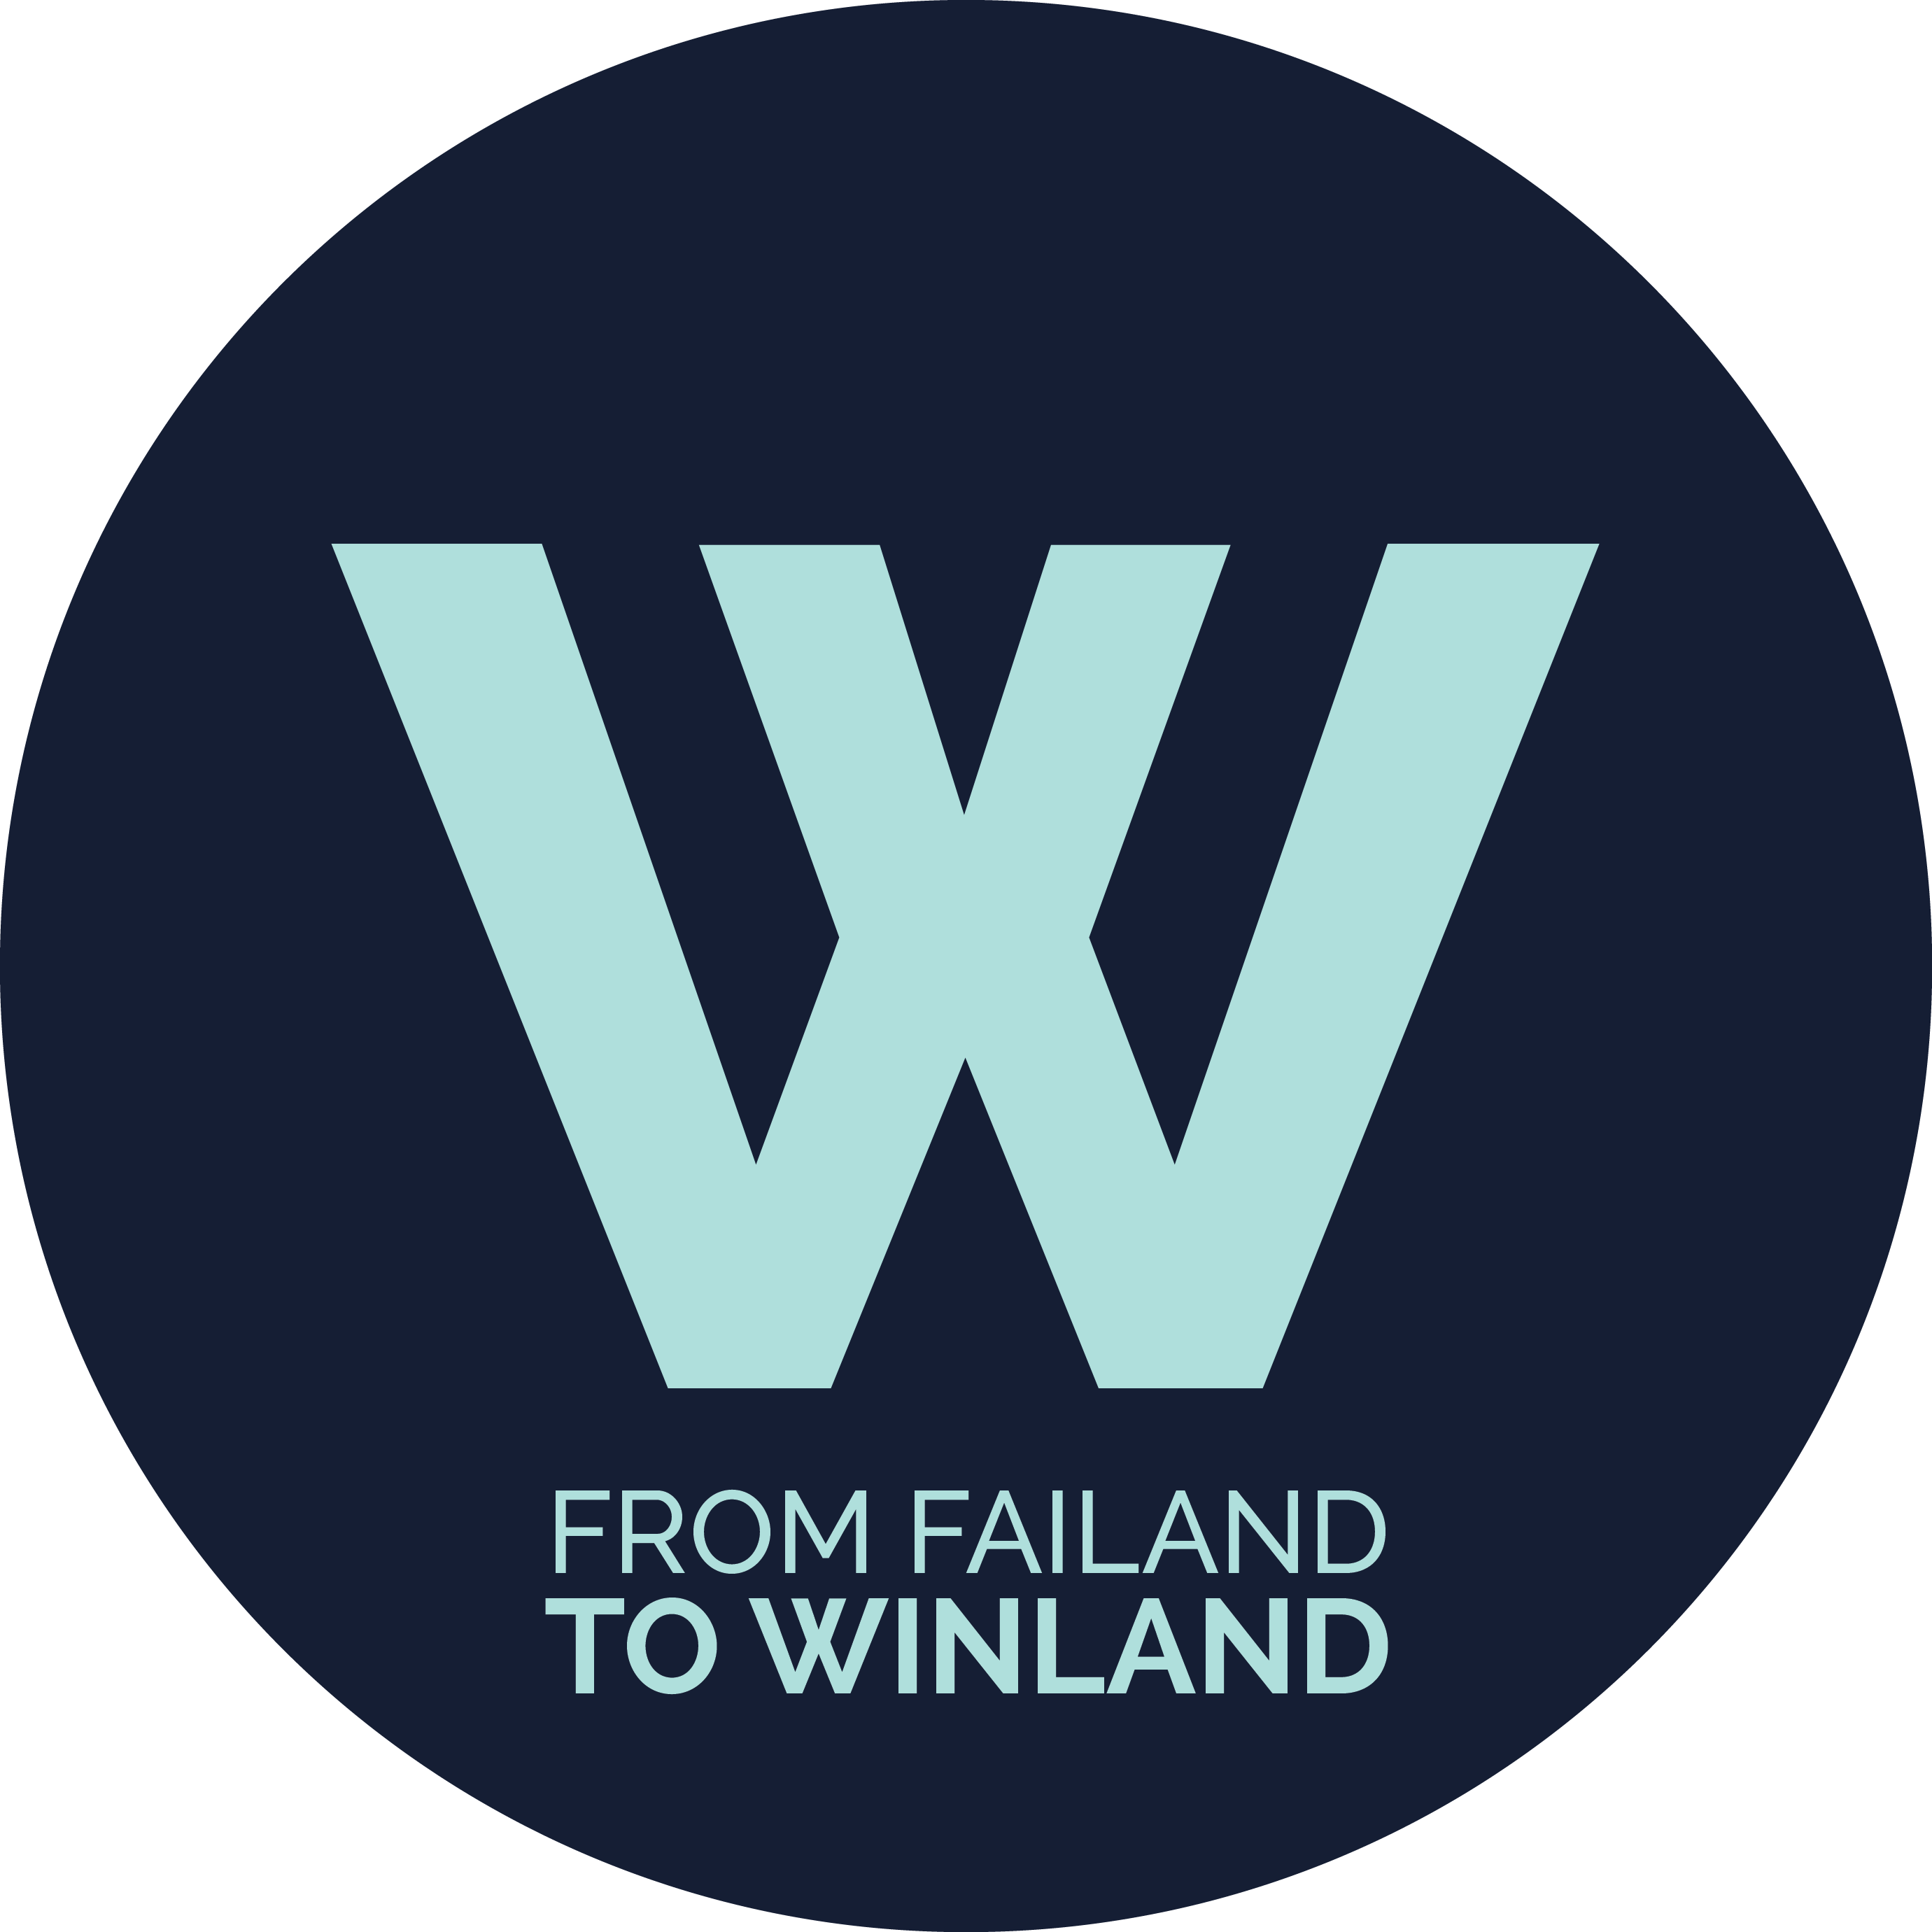 From Failand to Winland